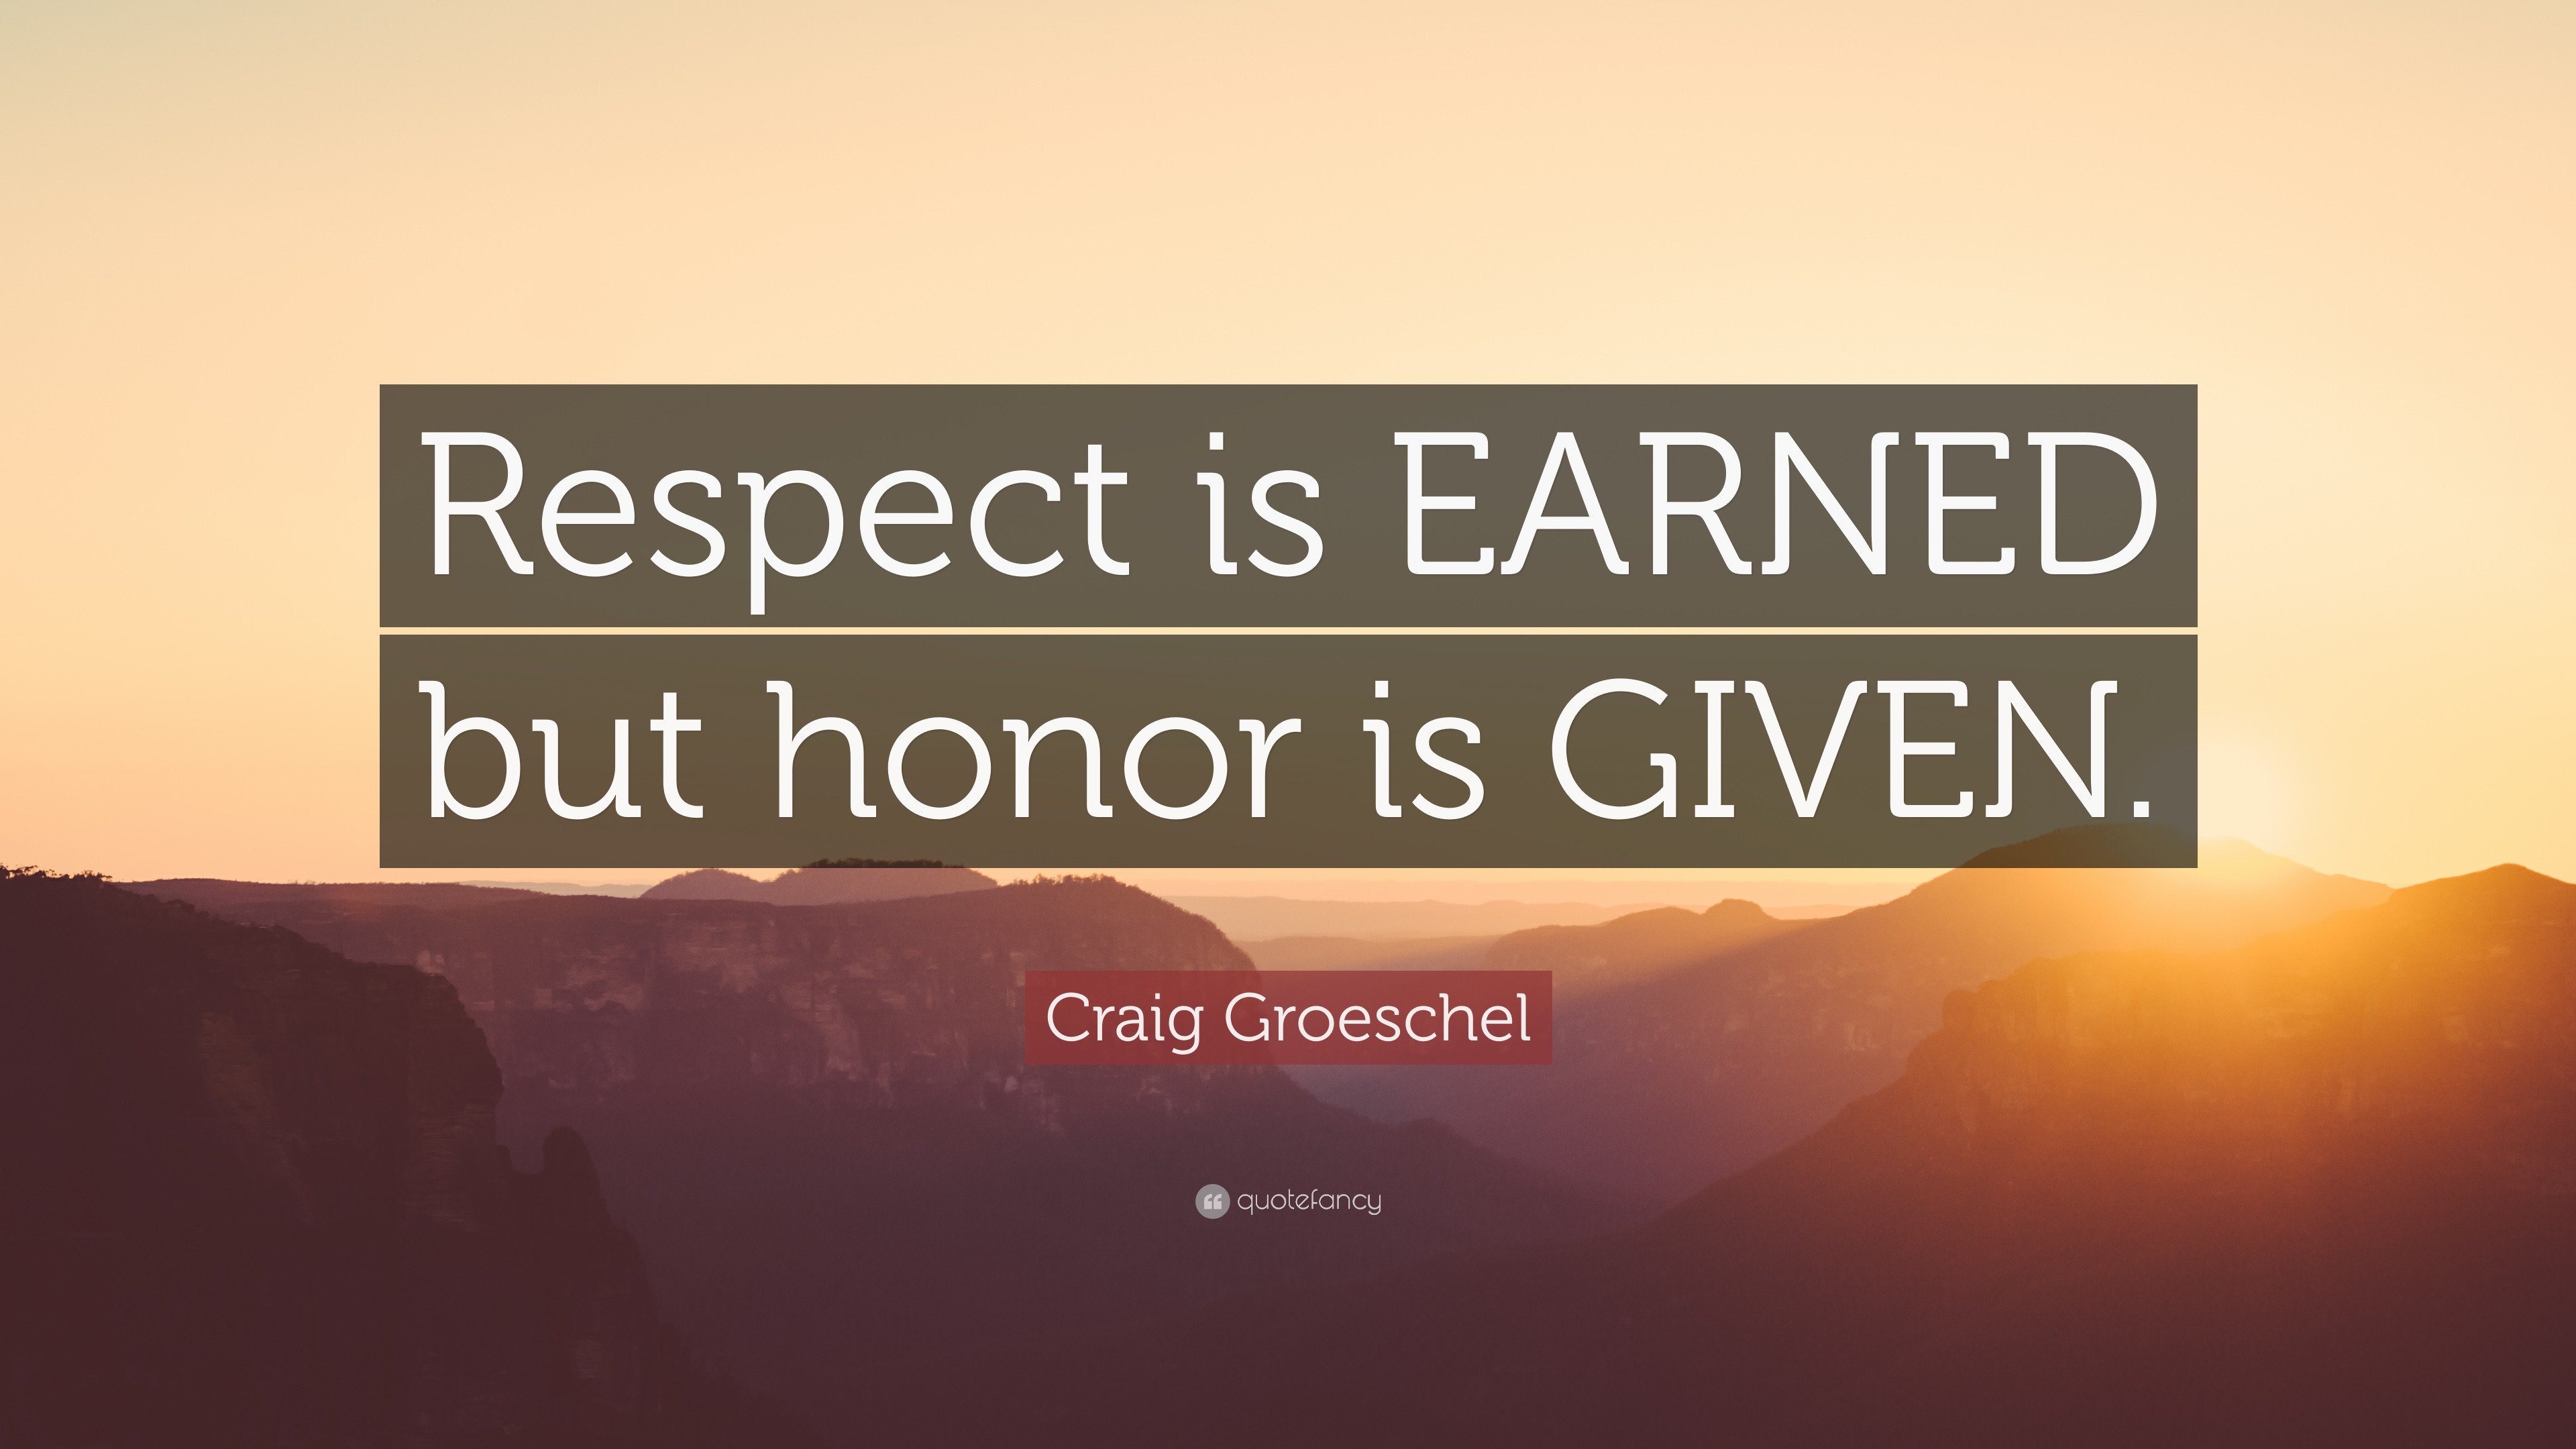 Craig Groeschel Quote: "Respect is EARNED but honor is ...